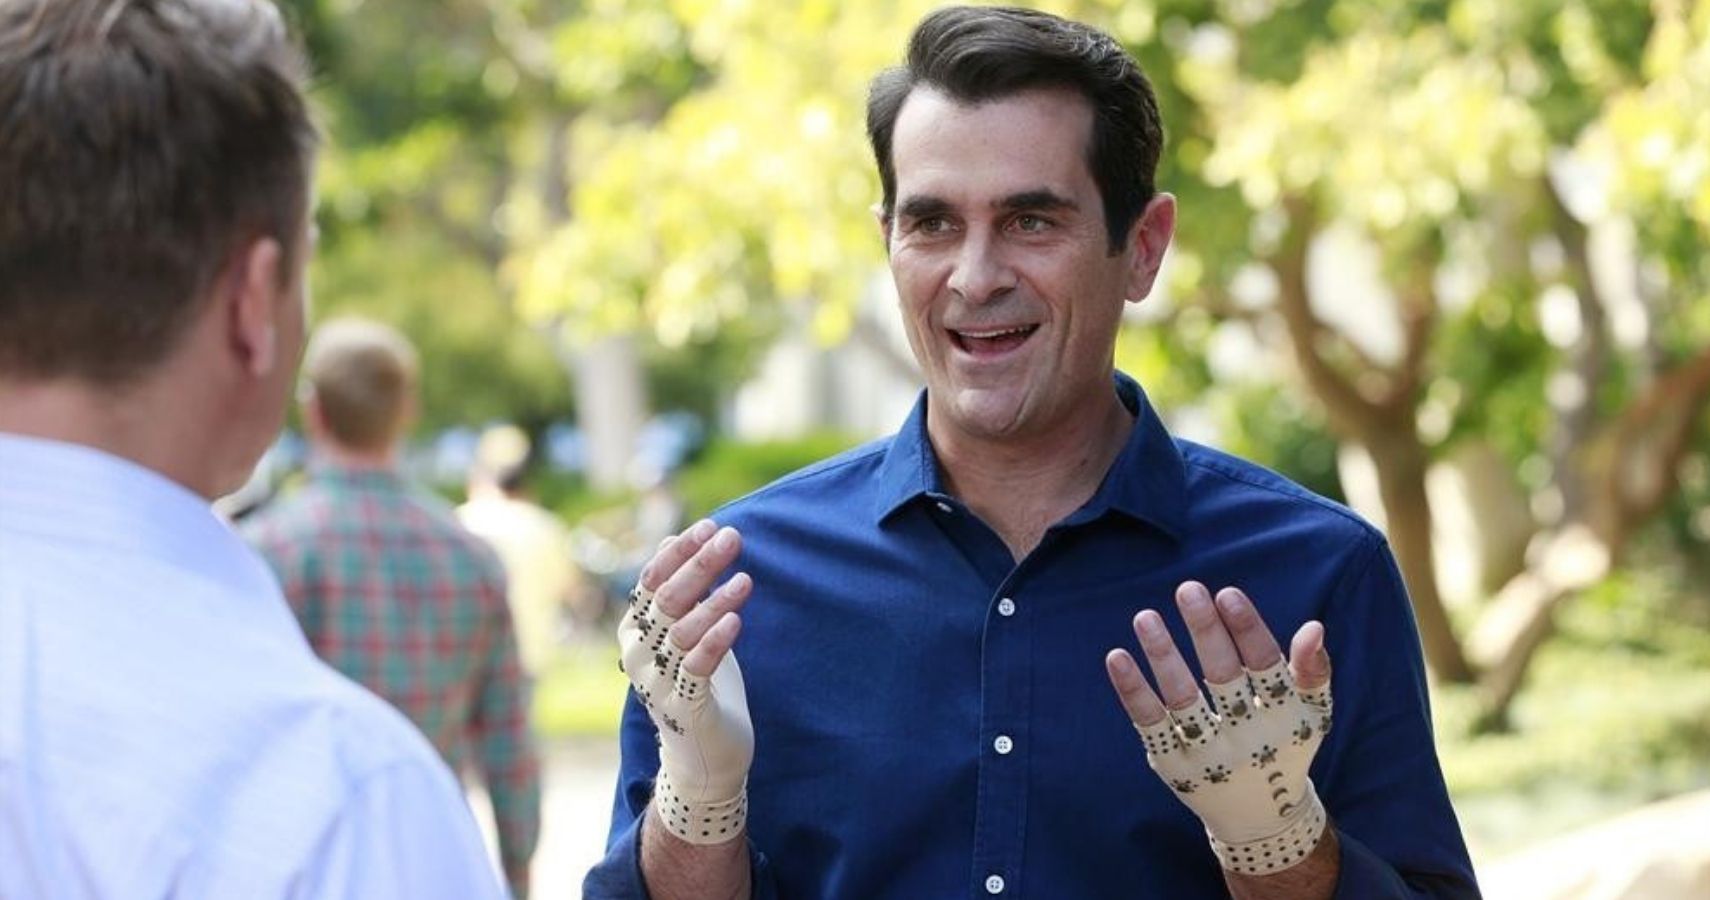 Modern Family - Phil Dunphy showing off his hand gloves on TV